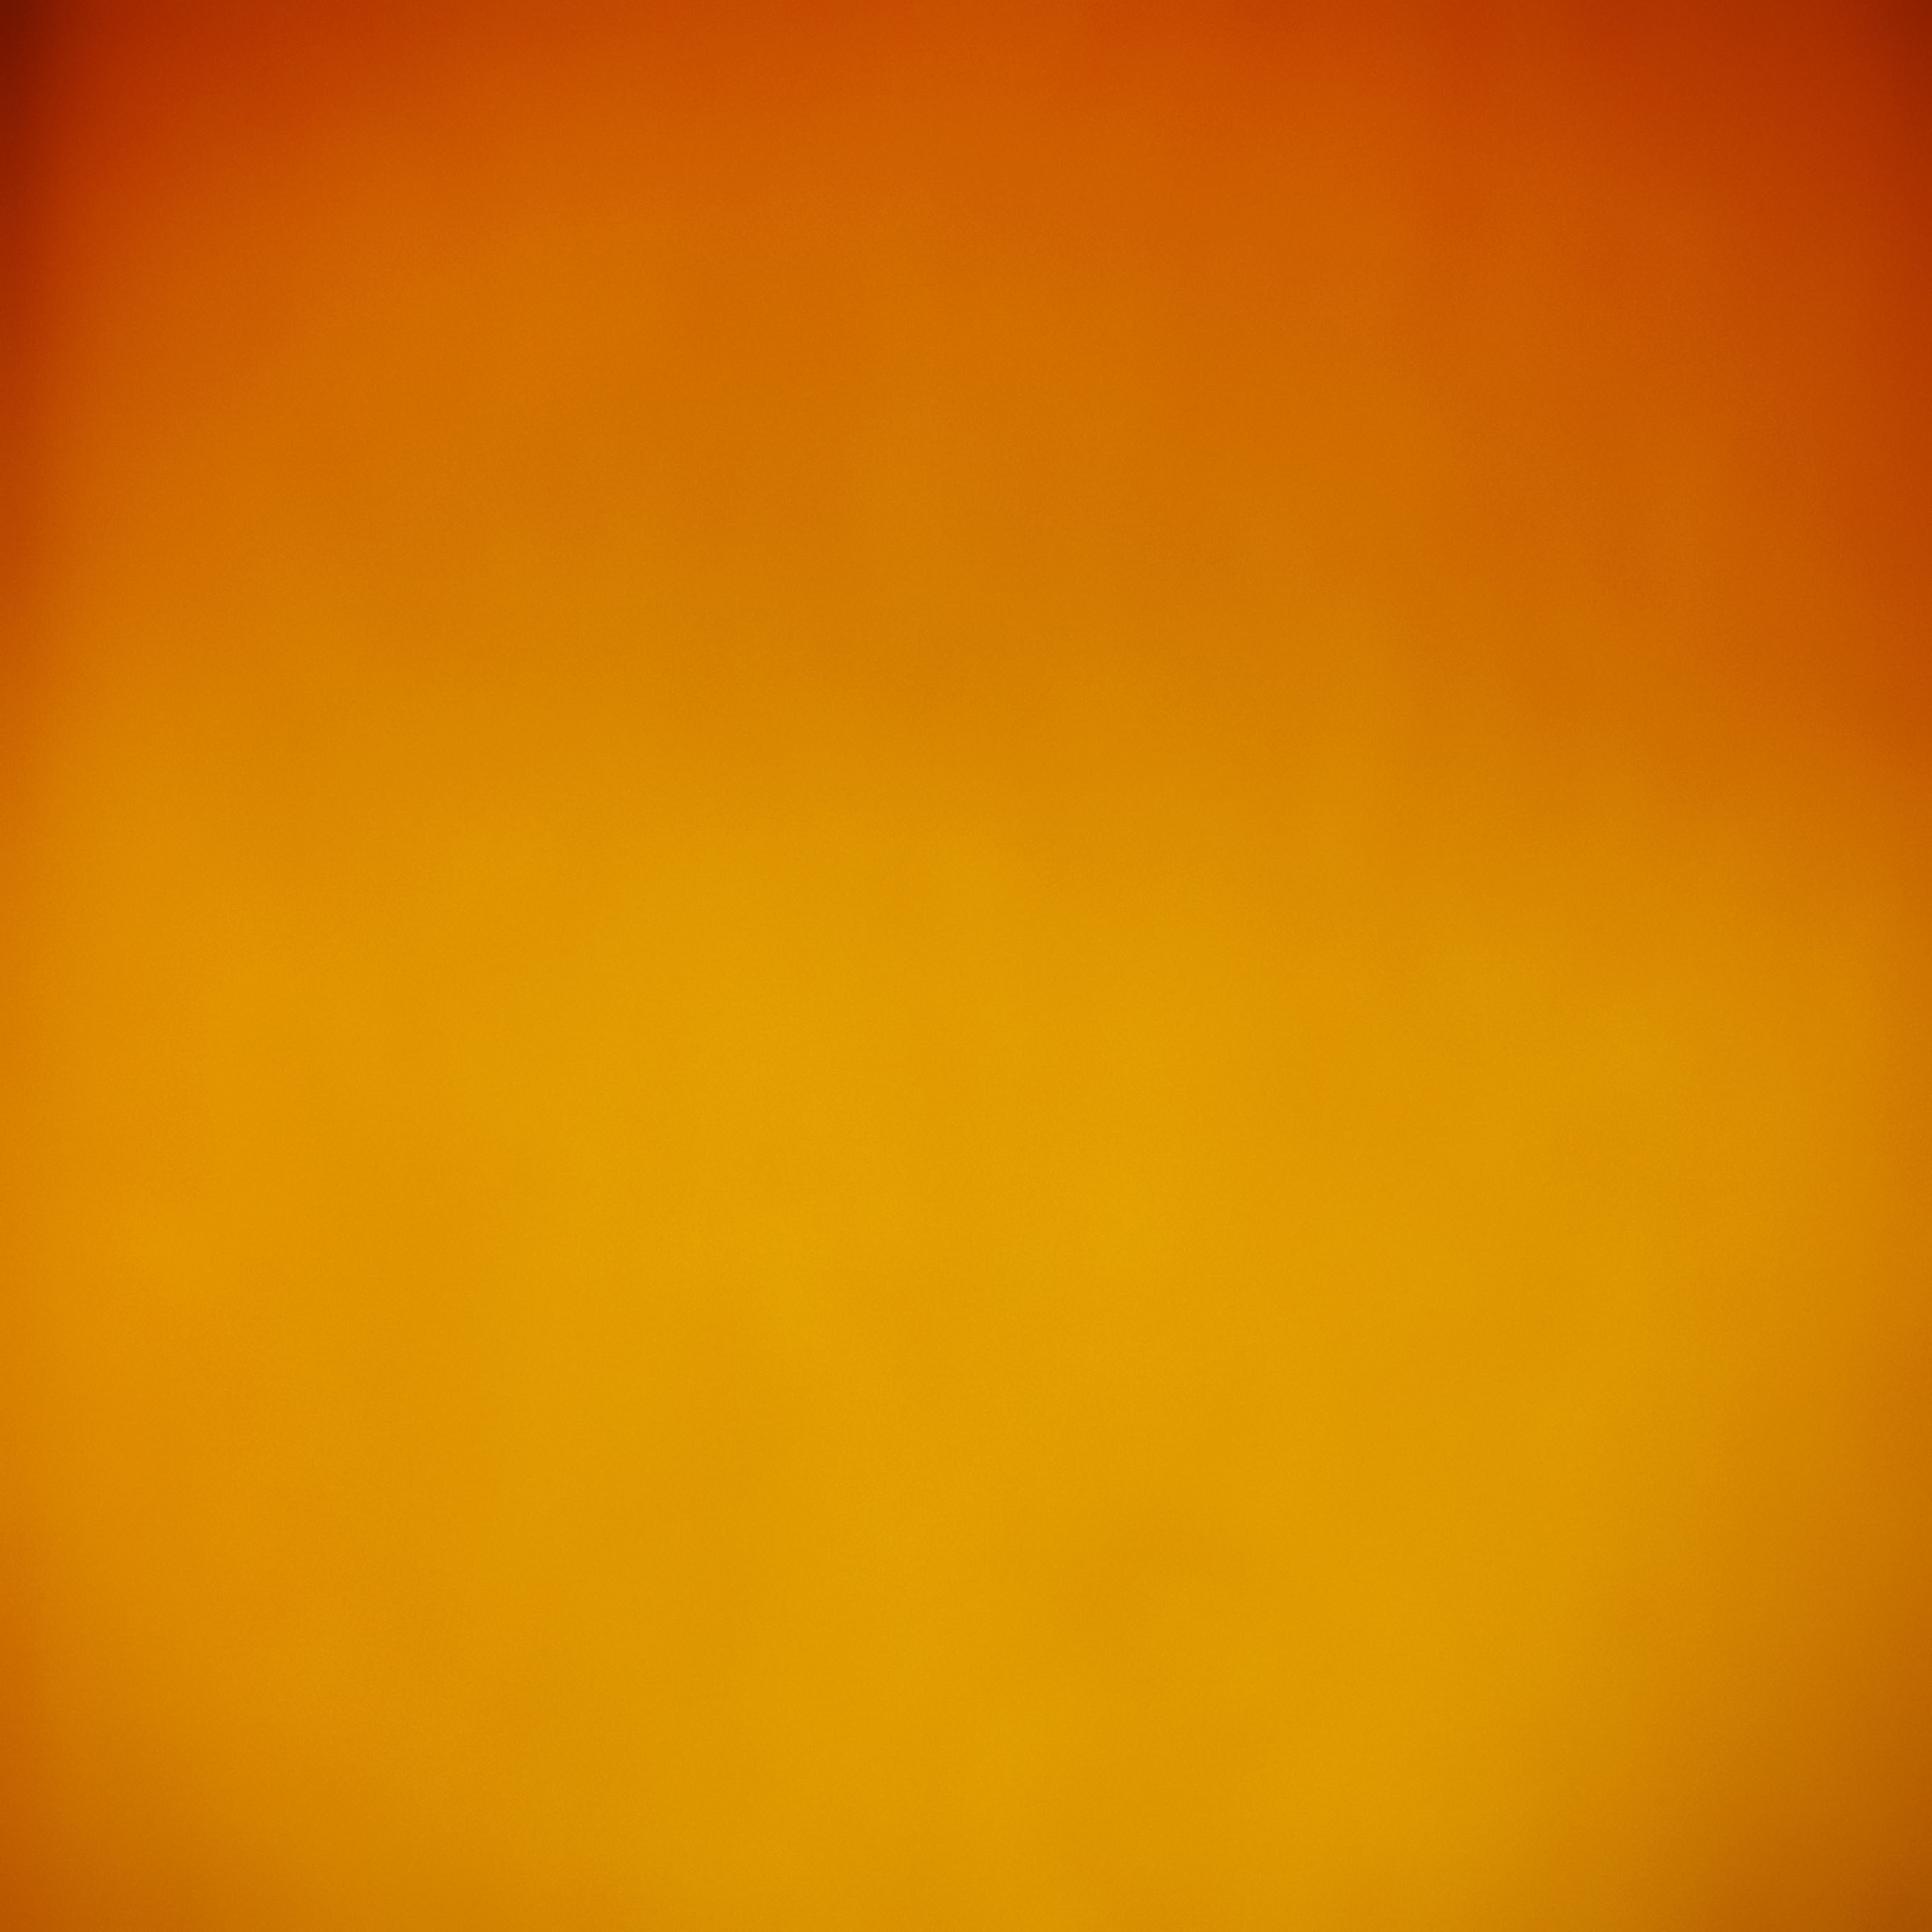 Hd Wallpapers For Ipad Pro - Yellow Orange Simple Background - HD Wallpaper 